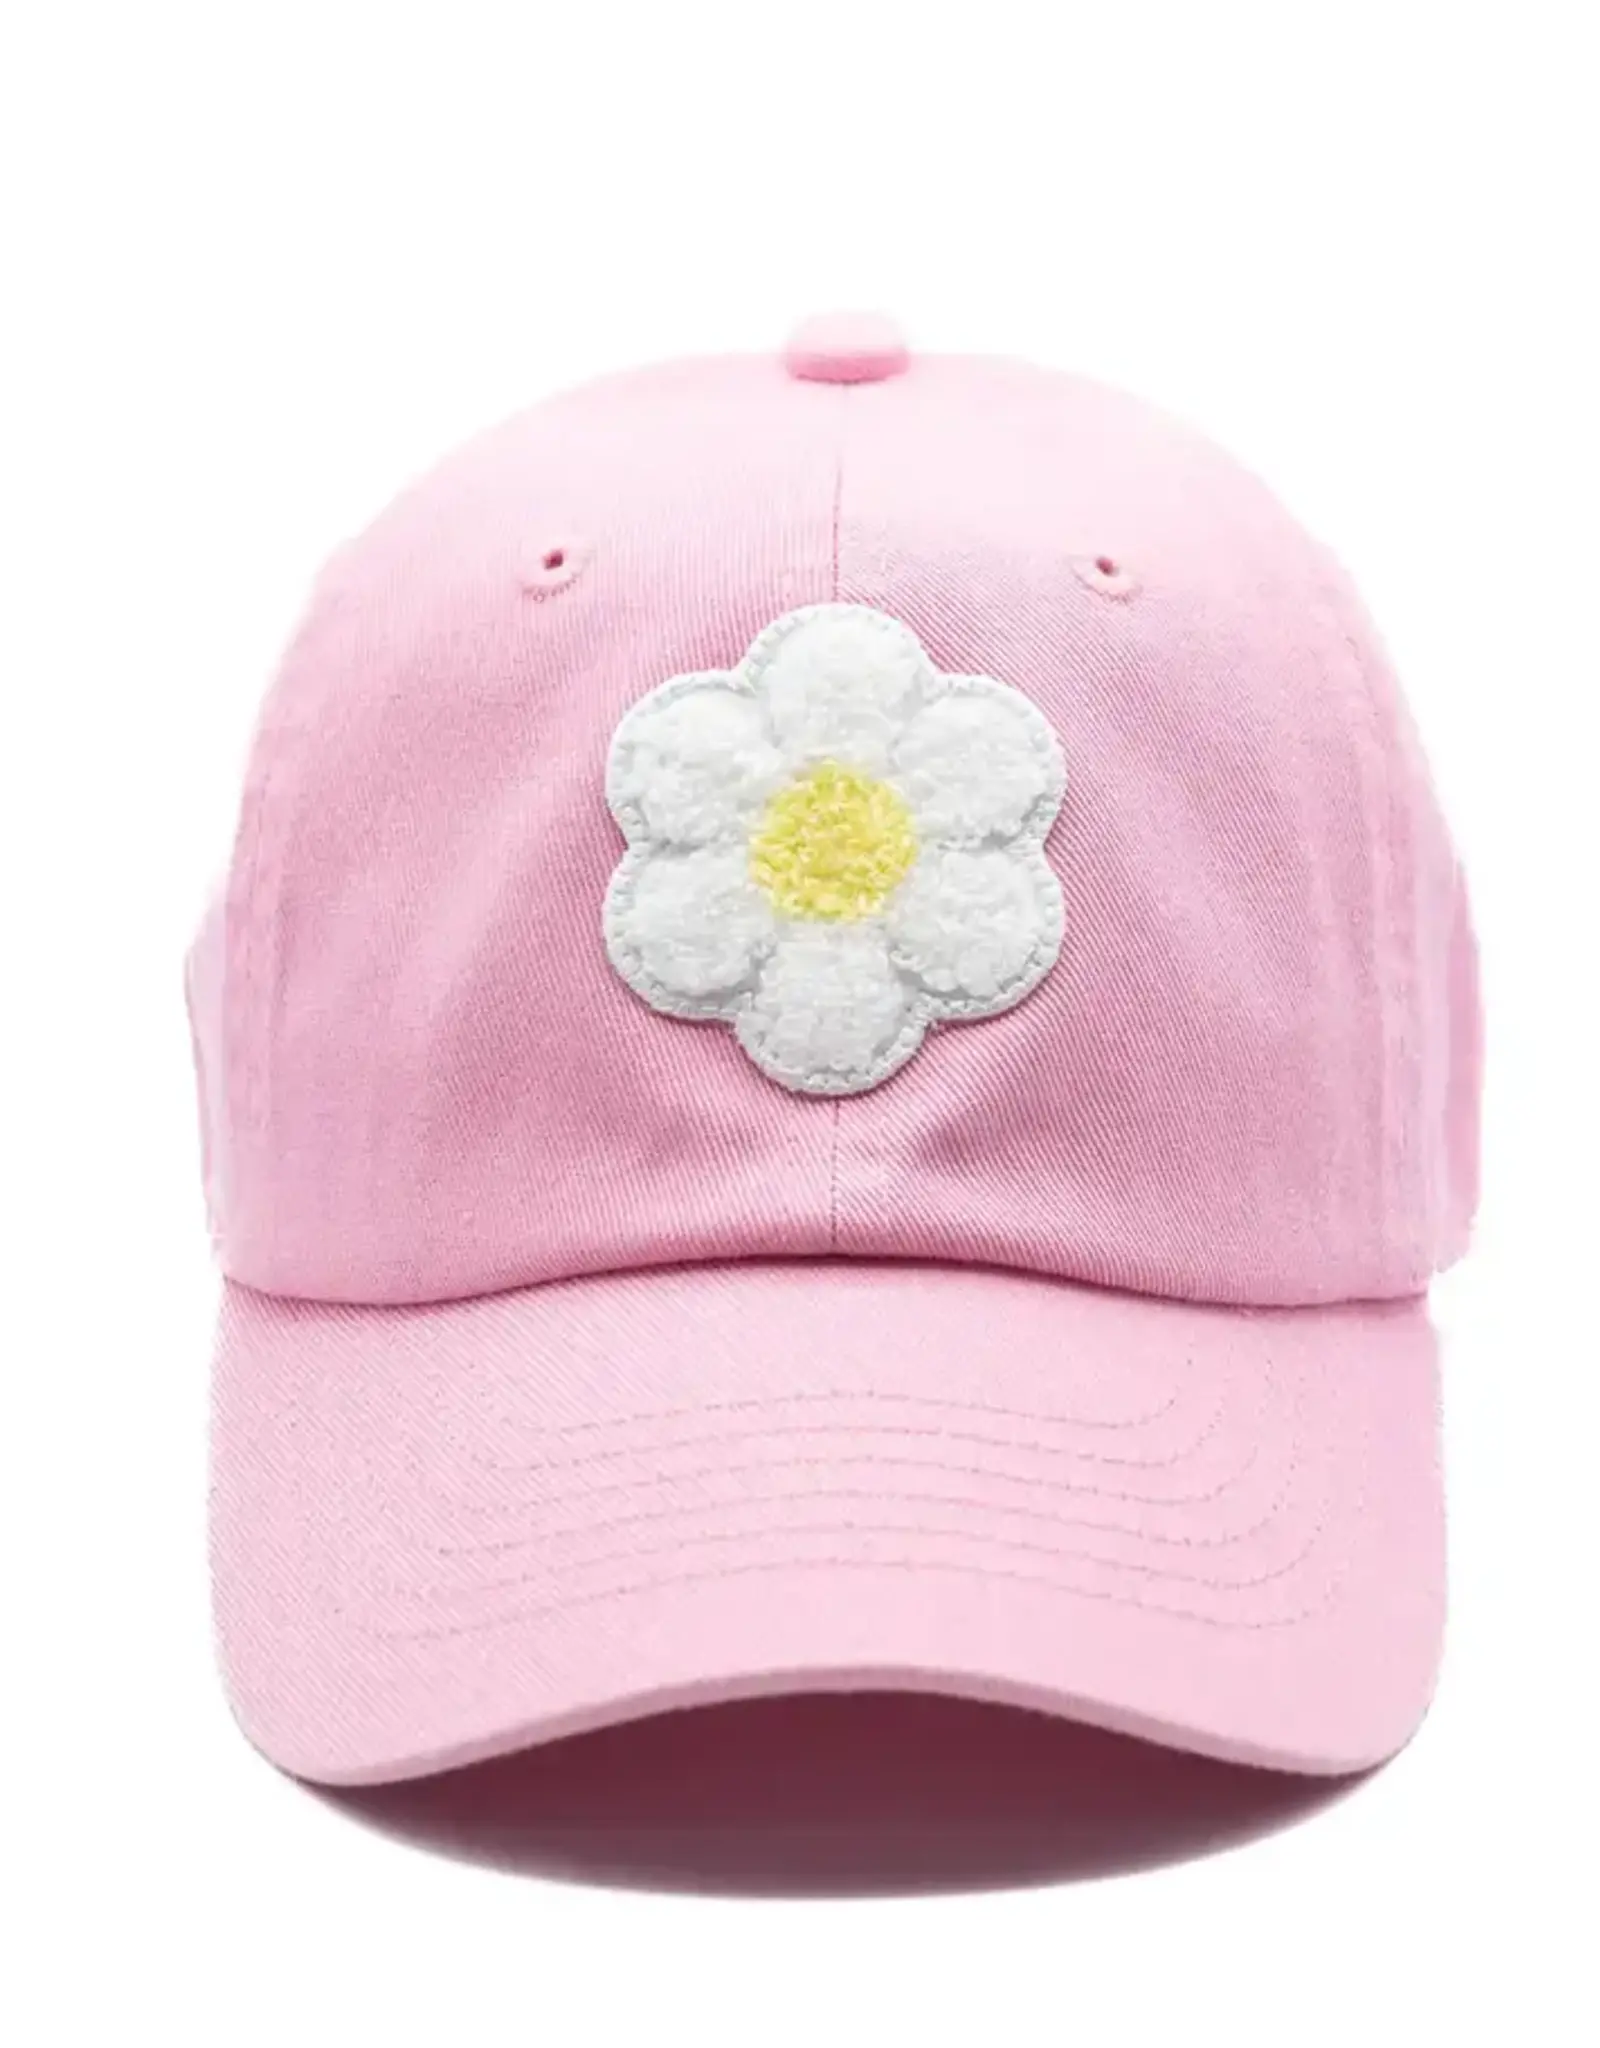 Rey to Z Pink Baseball Hat Flower White-Yellow 1-4Y